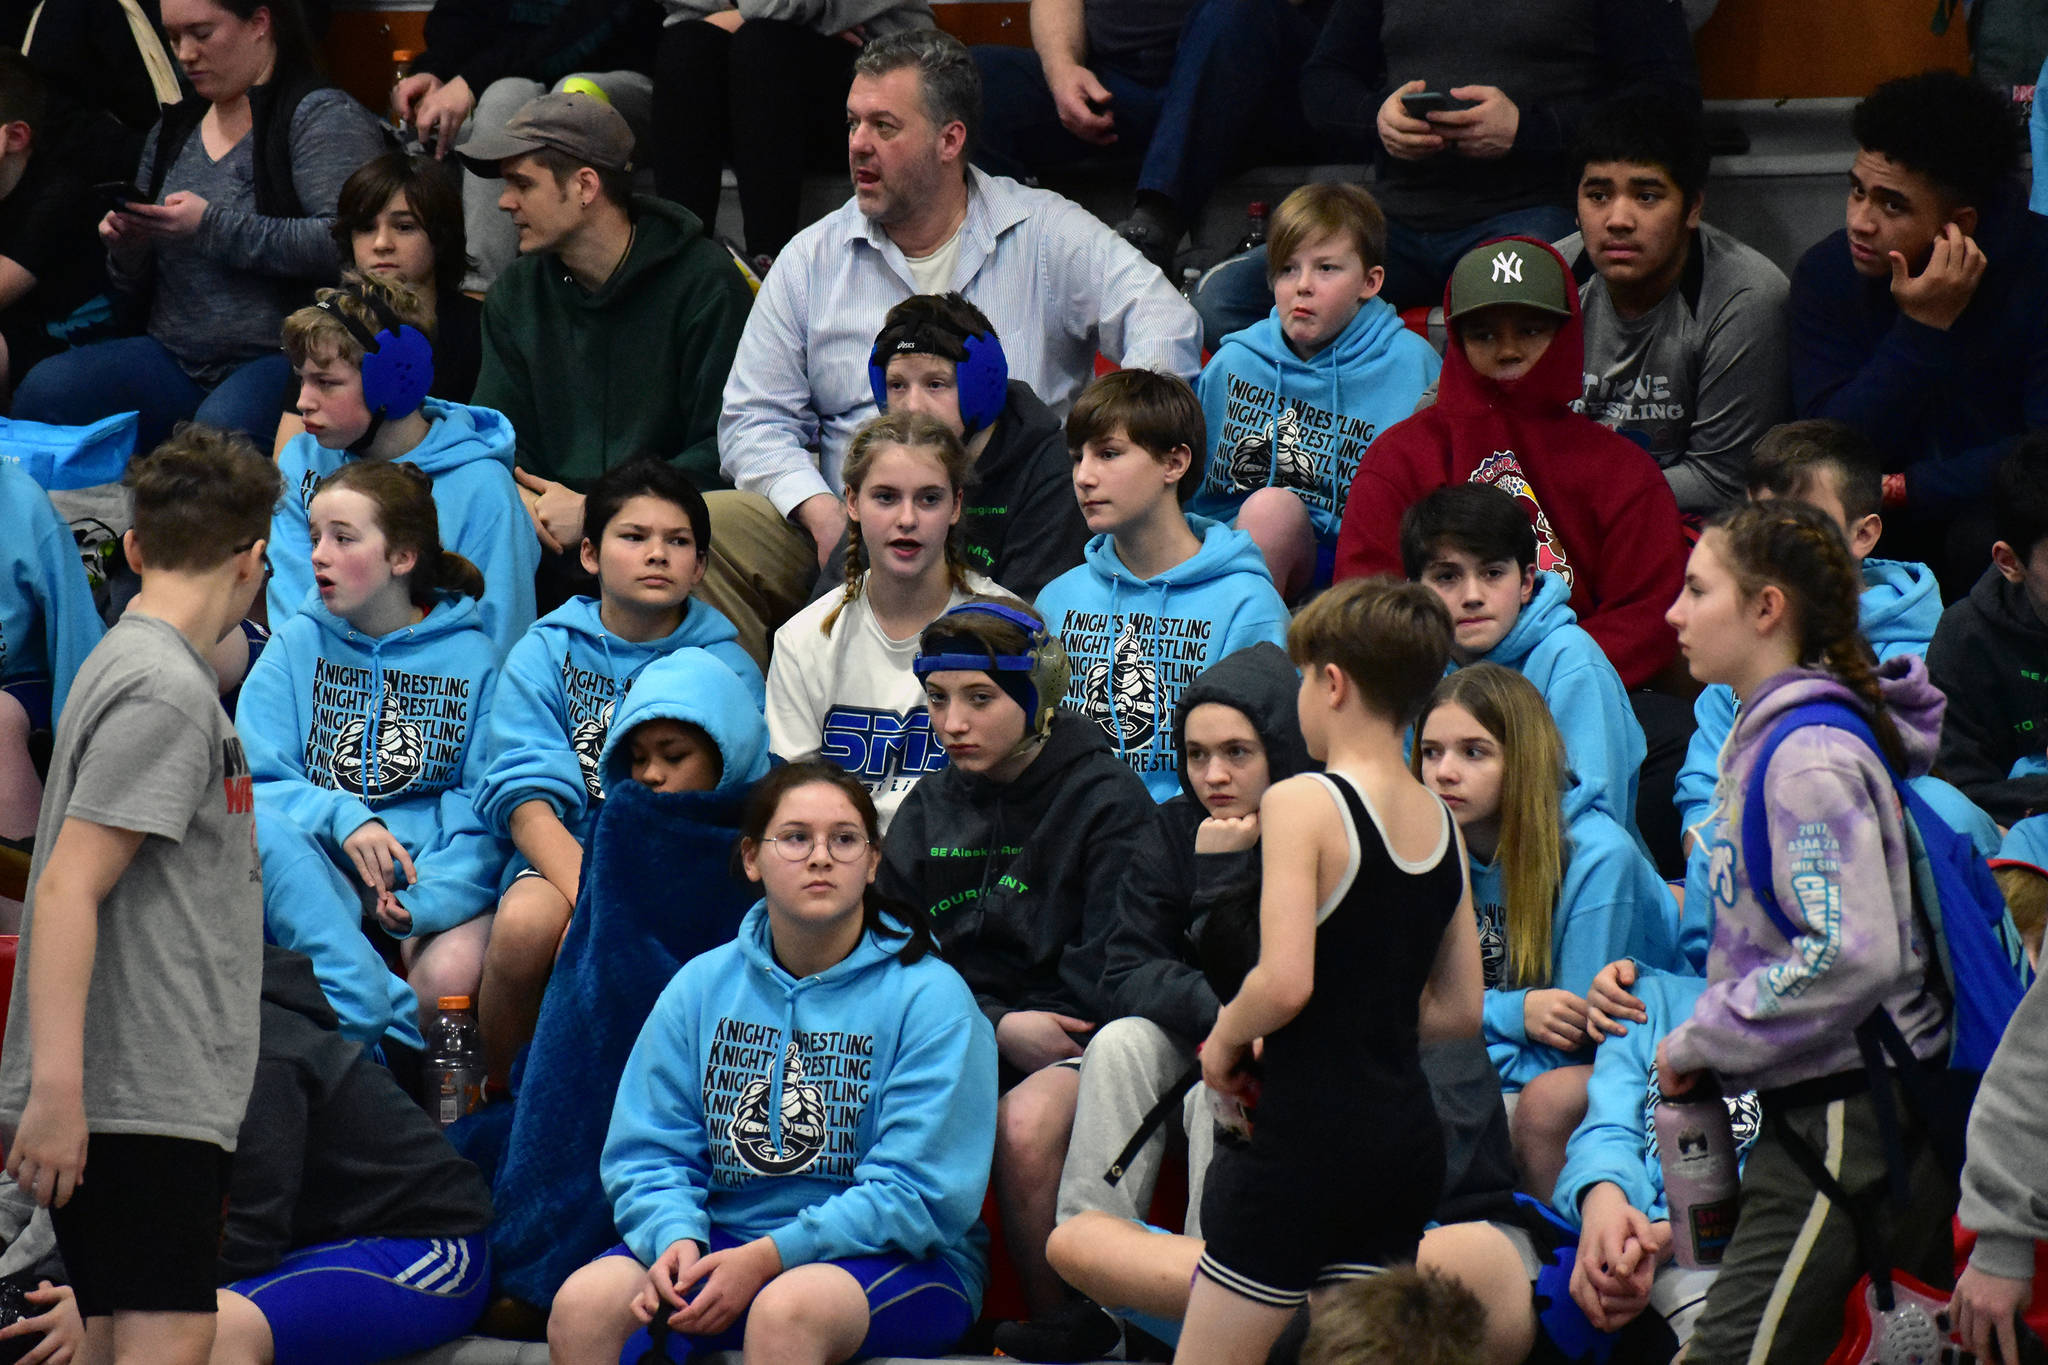 Visiting students watch from the stands at Floyd Dryden Middle School during the 2020 Southeast Alaska Middle School Wrestling Championship on Friday. (Peter Segall | Juneau Empire)